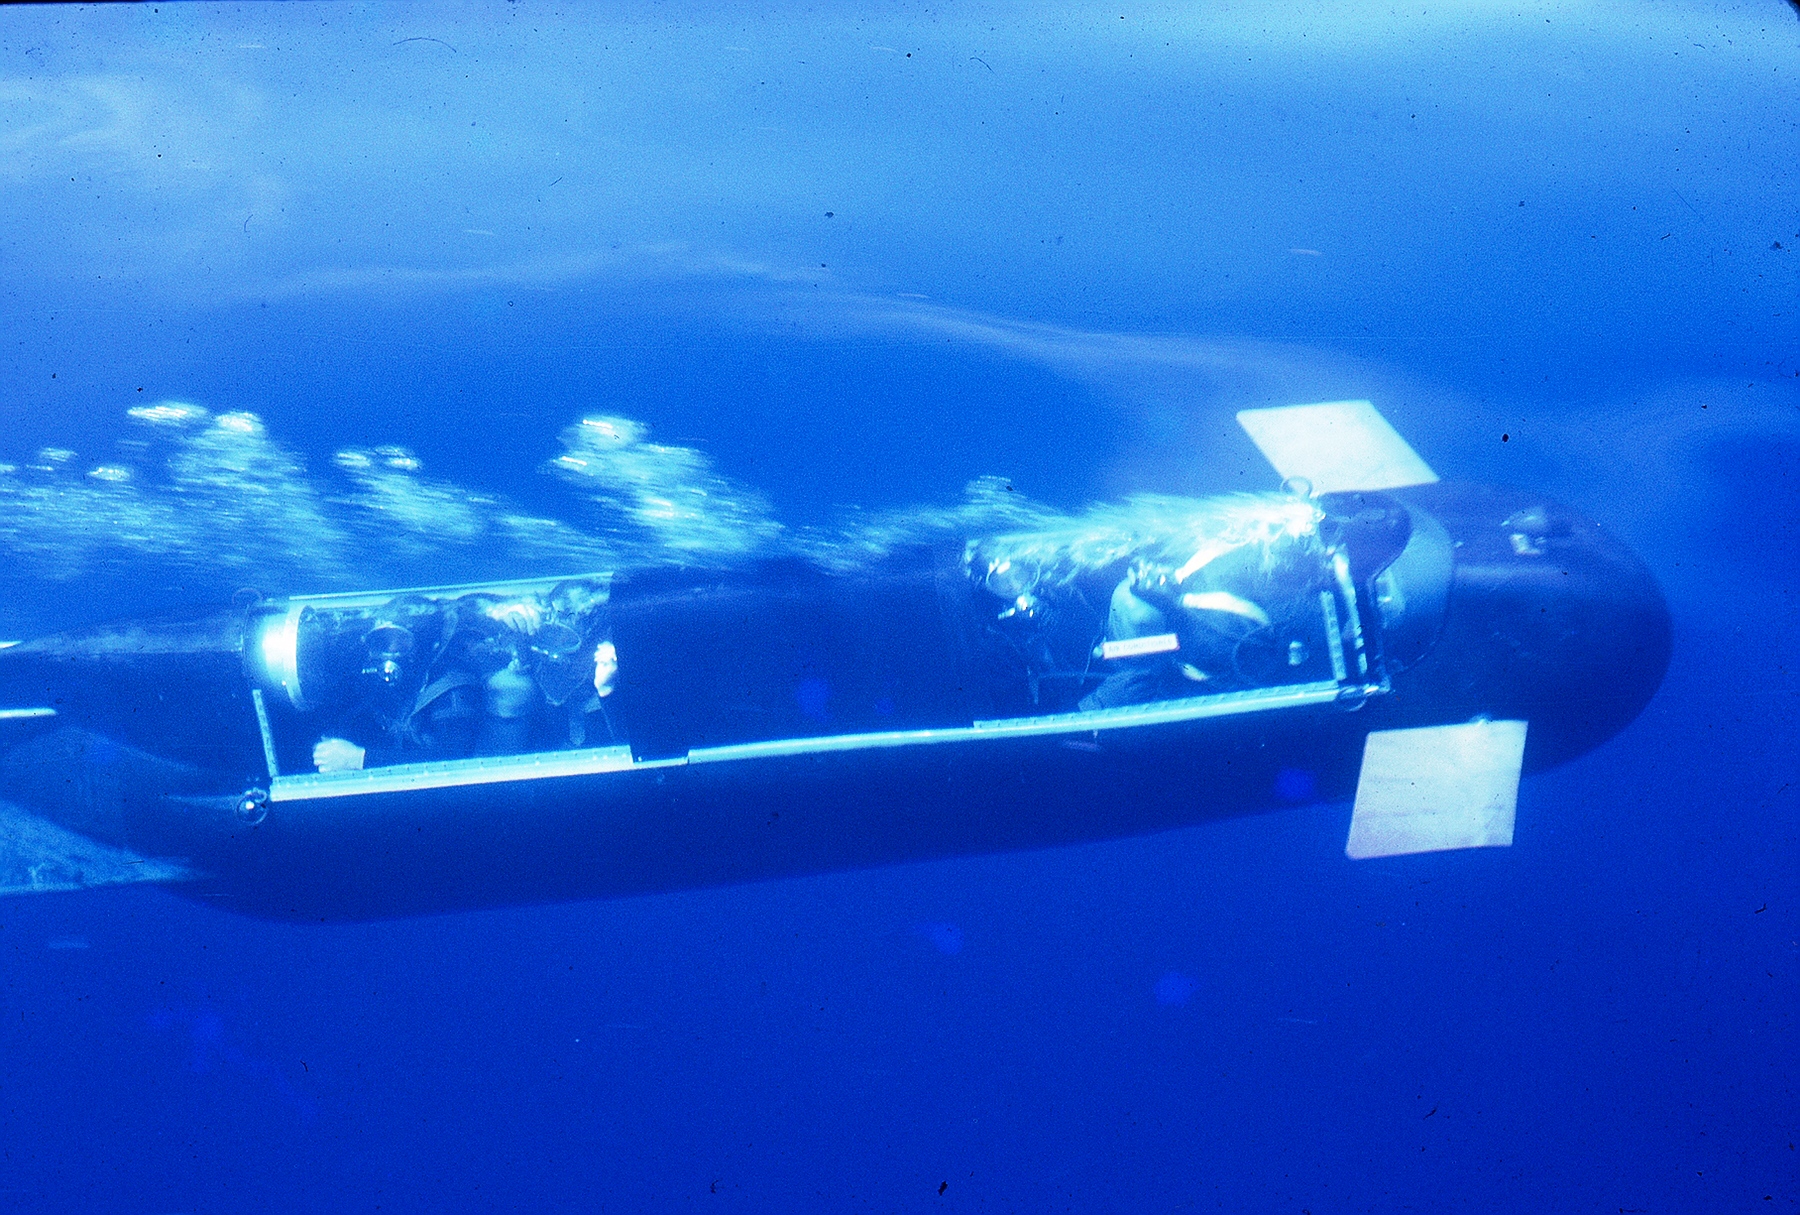 November 1967: Four divers are embarked in an underway MK VII, Mod 0 SDV. Photo was taken from the surface safety boat